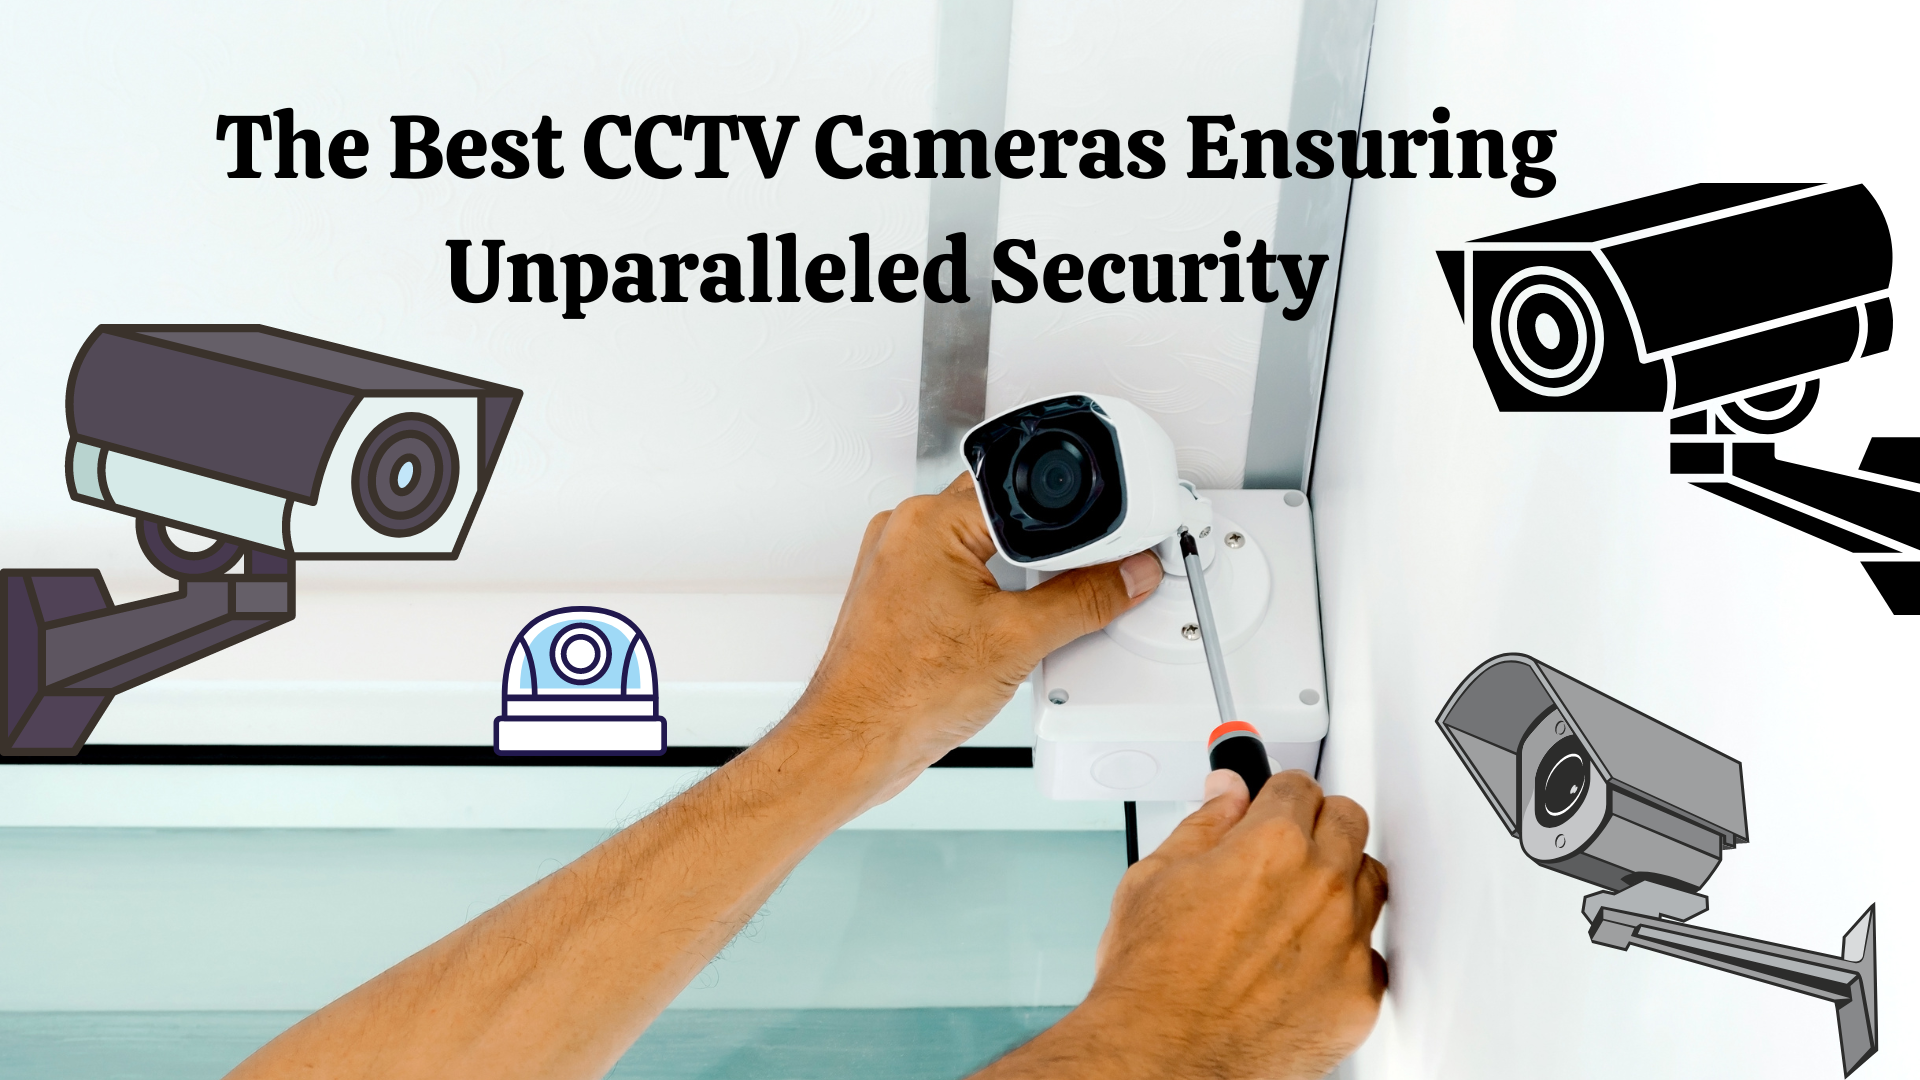 The Best CCTV Cameras Ensuring Unparalleled Security